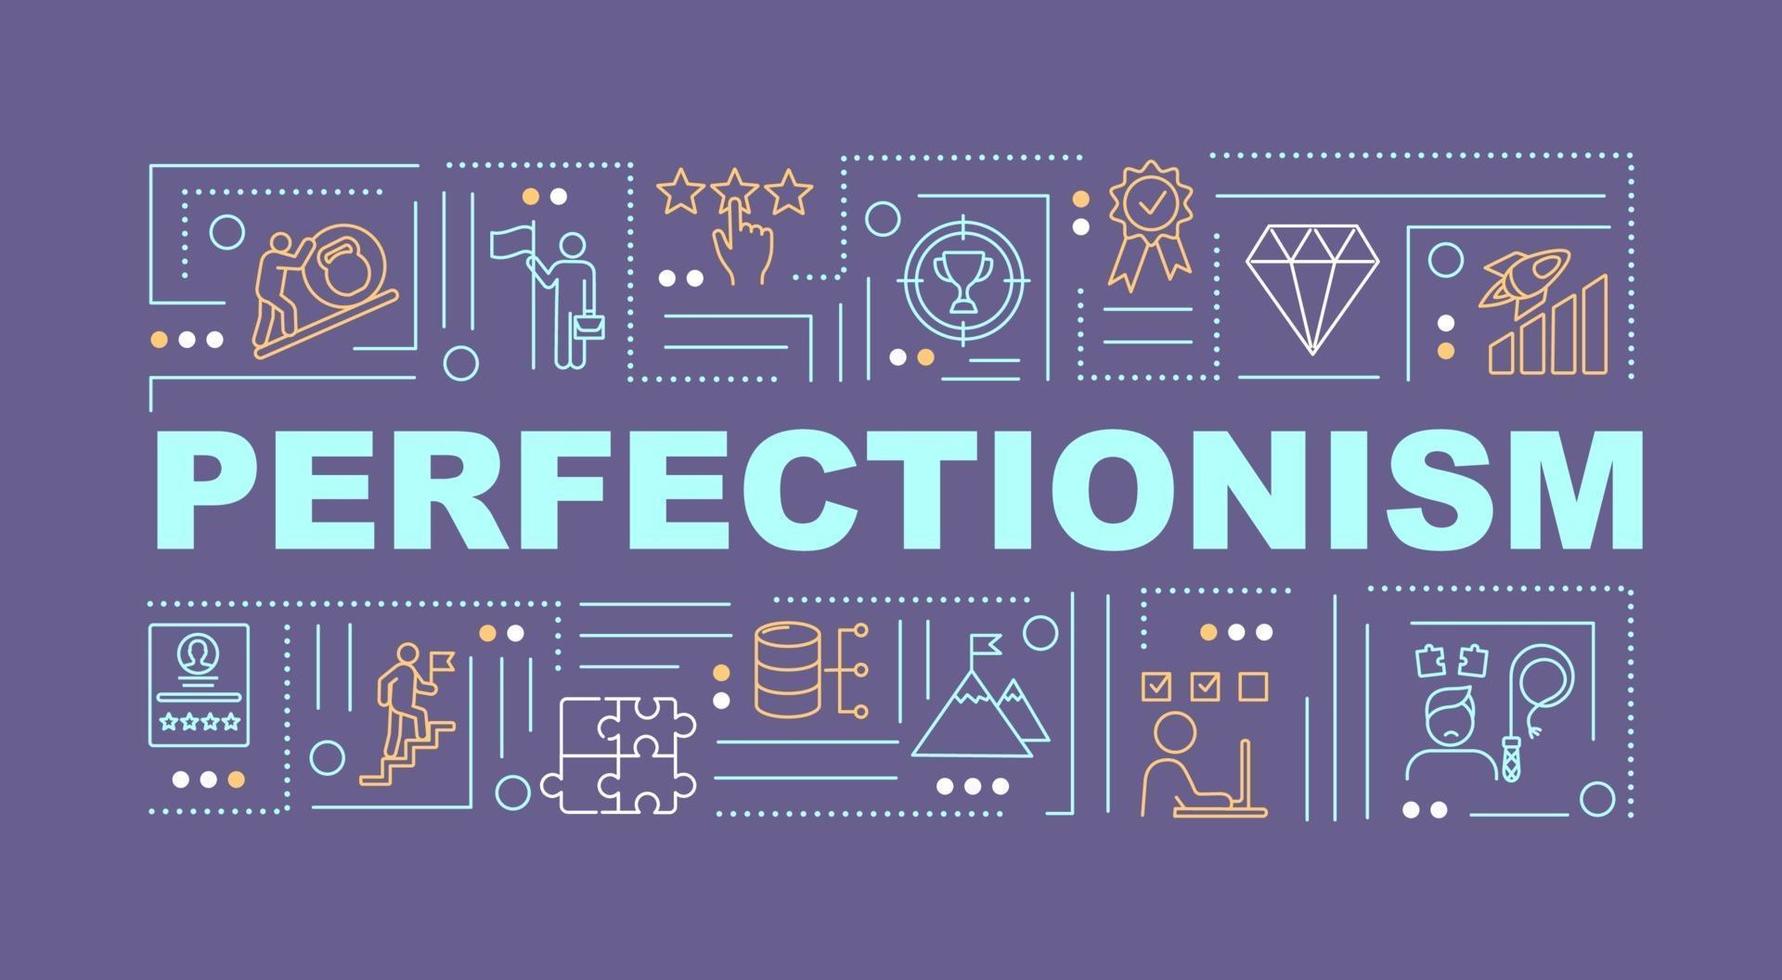 Perfectionism word concepts banner vector